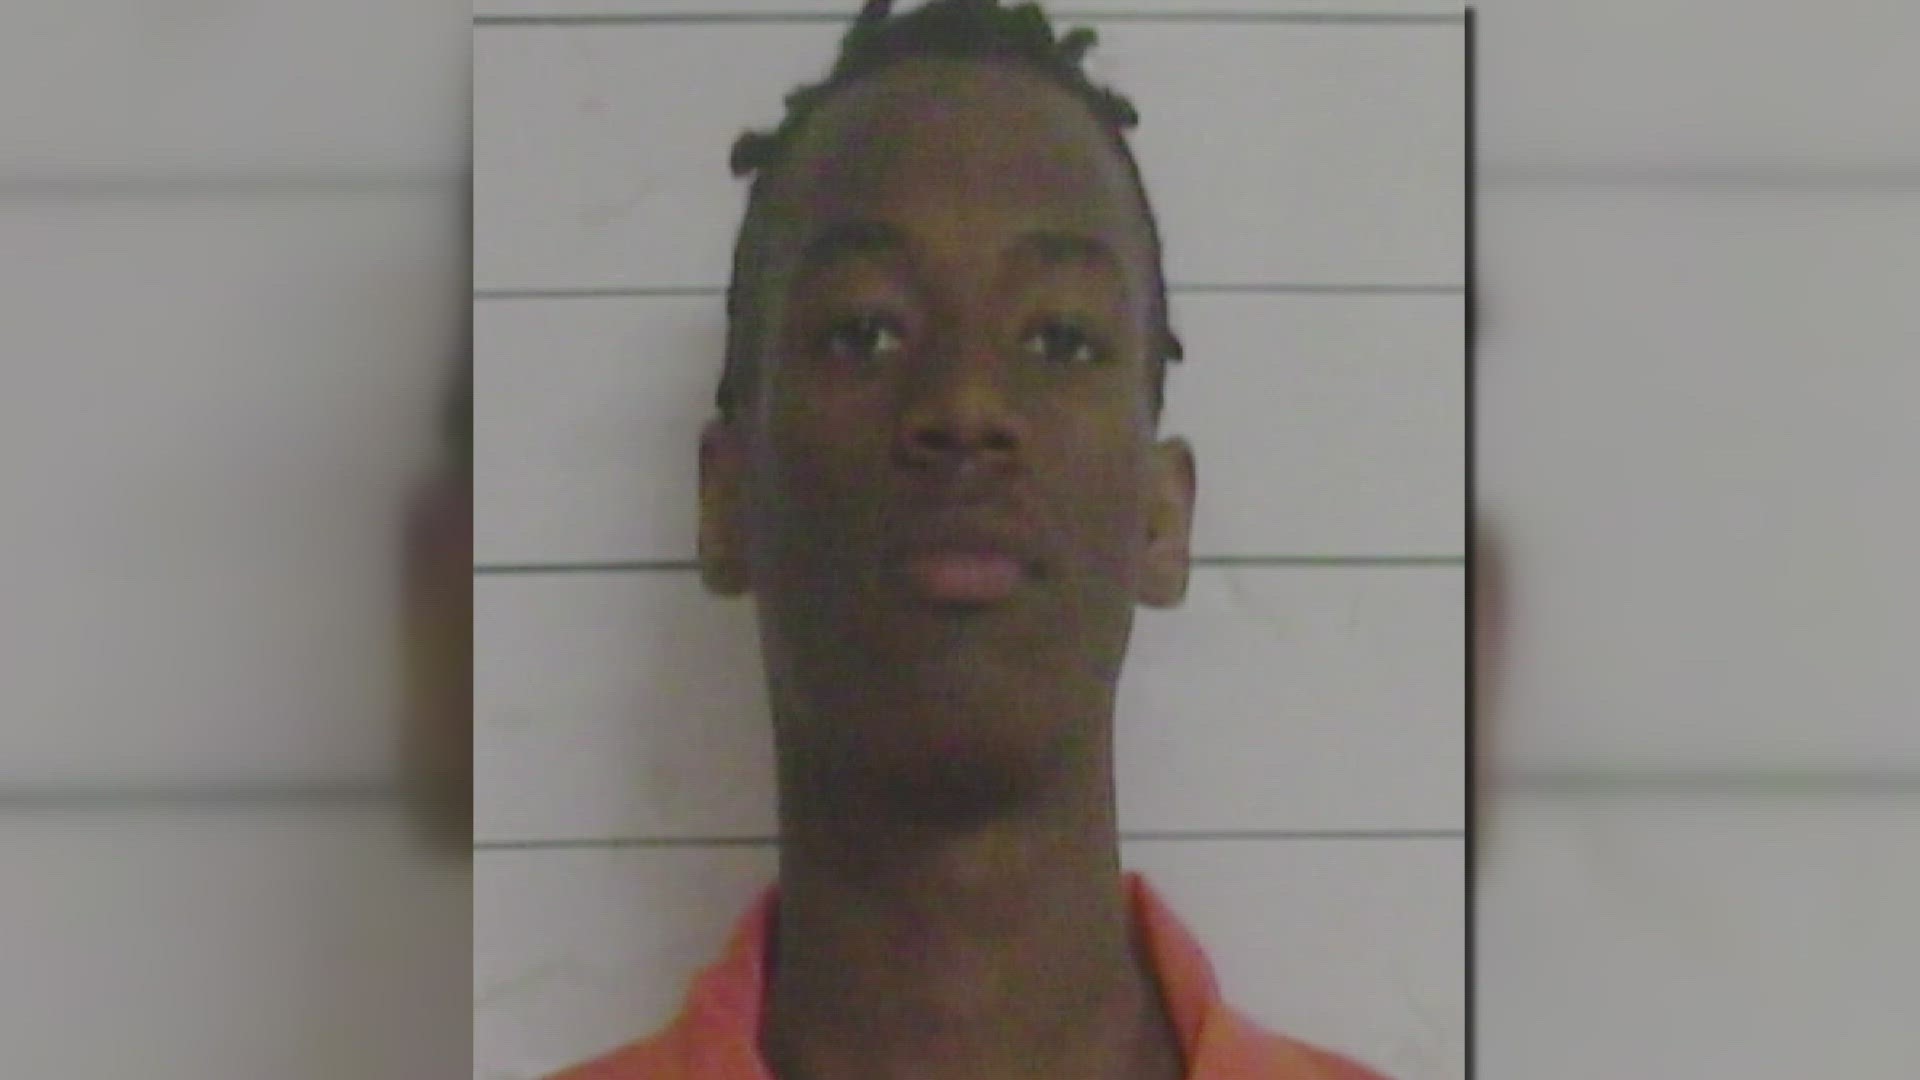 A judge has sentenced 20-year-old Tyrese Harris to 45 years in prison for a carjacking that seriously injured a woman while she pumped gas.